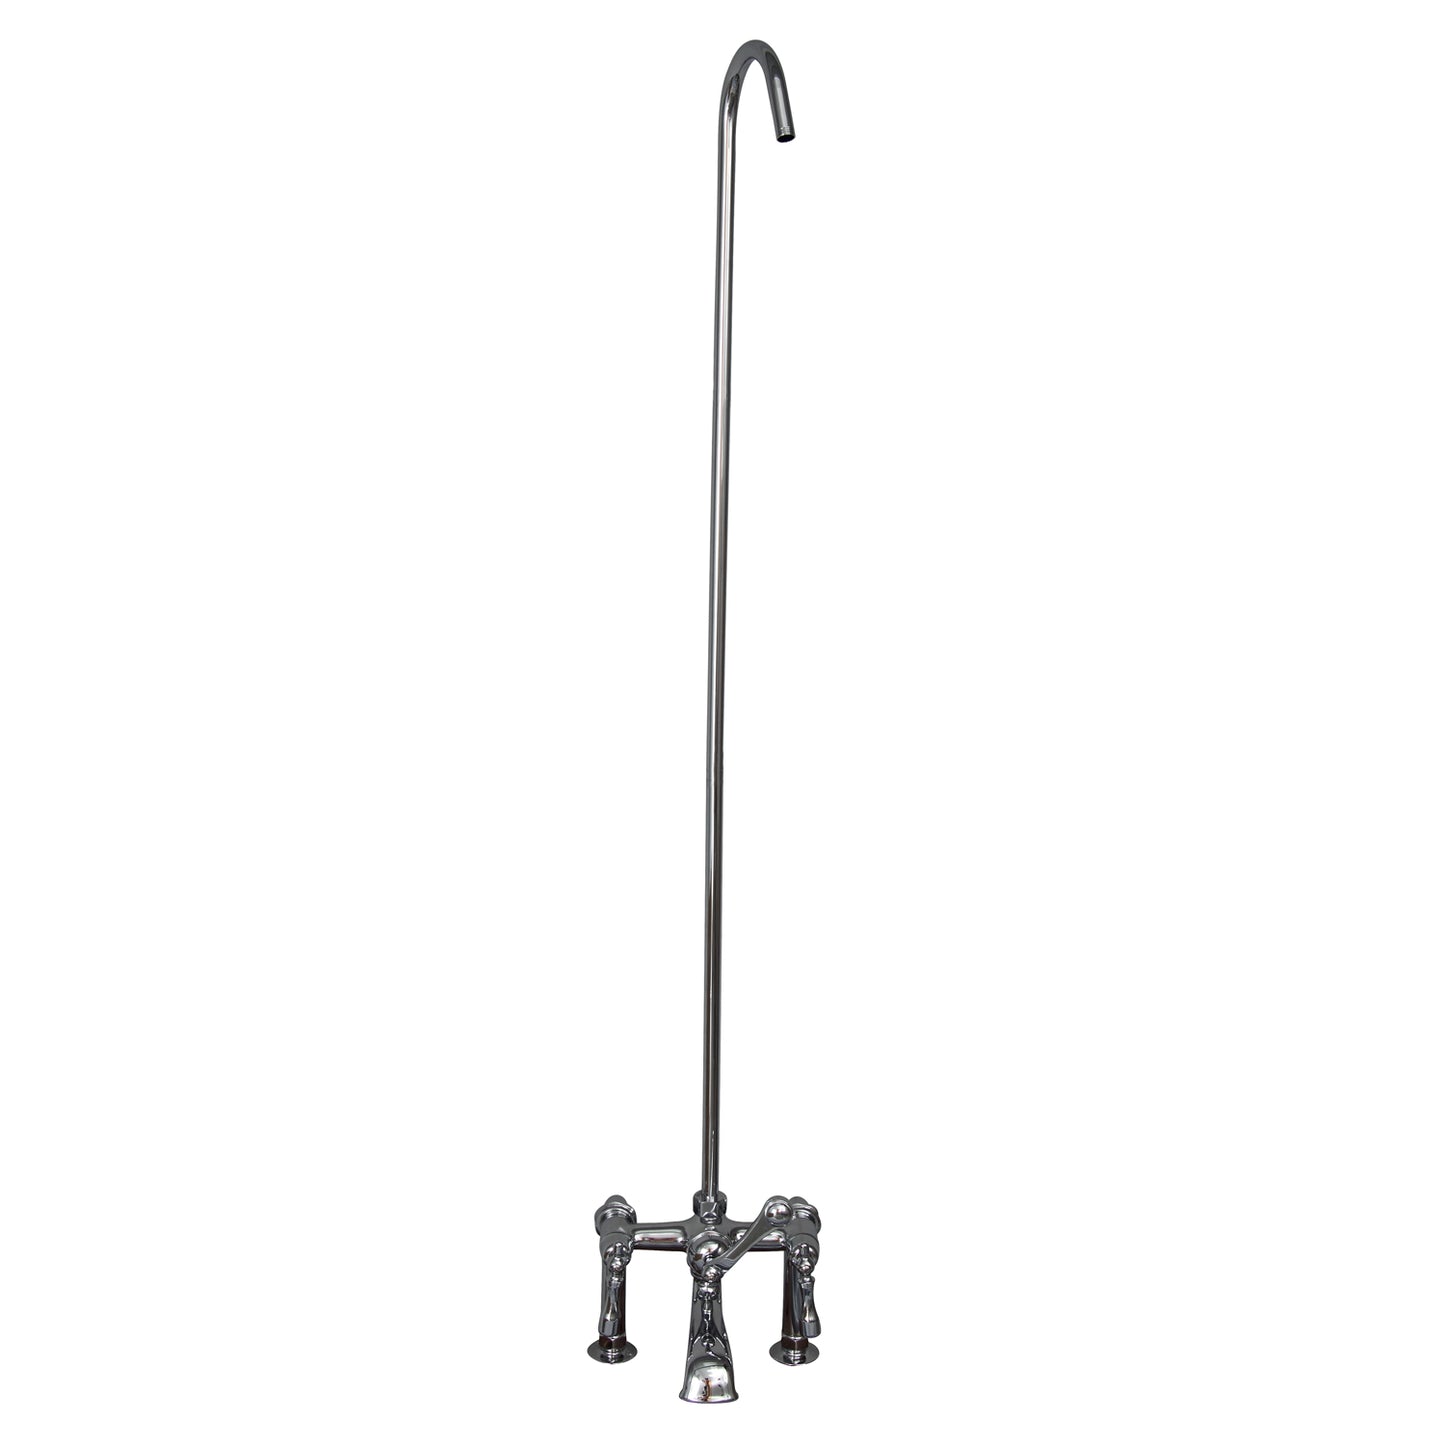 Tub Rim Mount Diverter Faucet with Finial Lever Handles & 62" Riser in Chrome